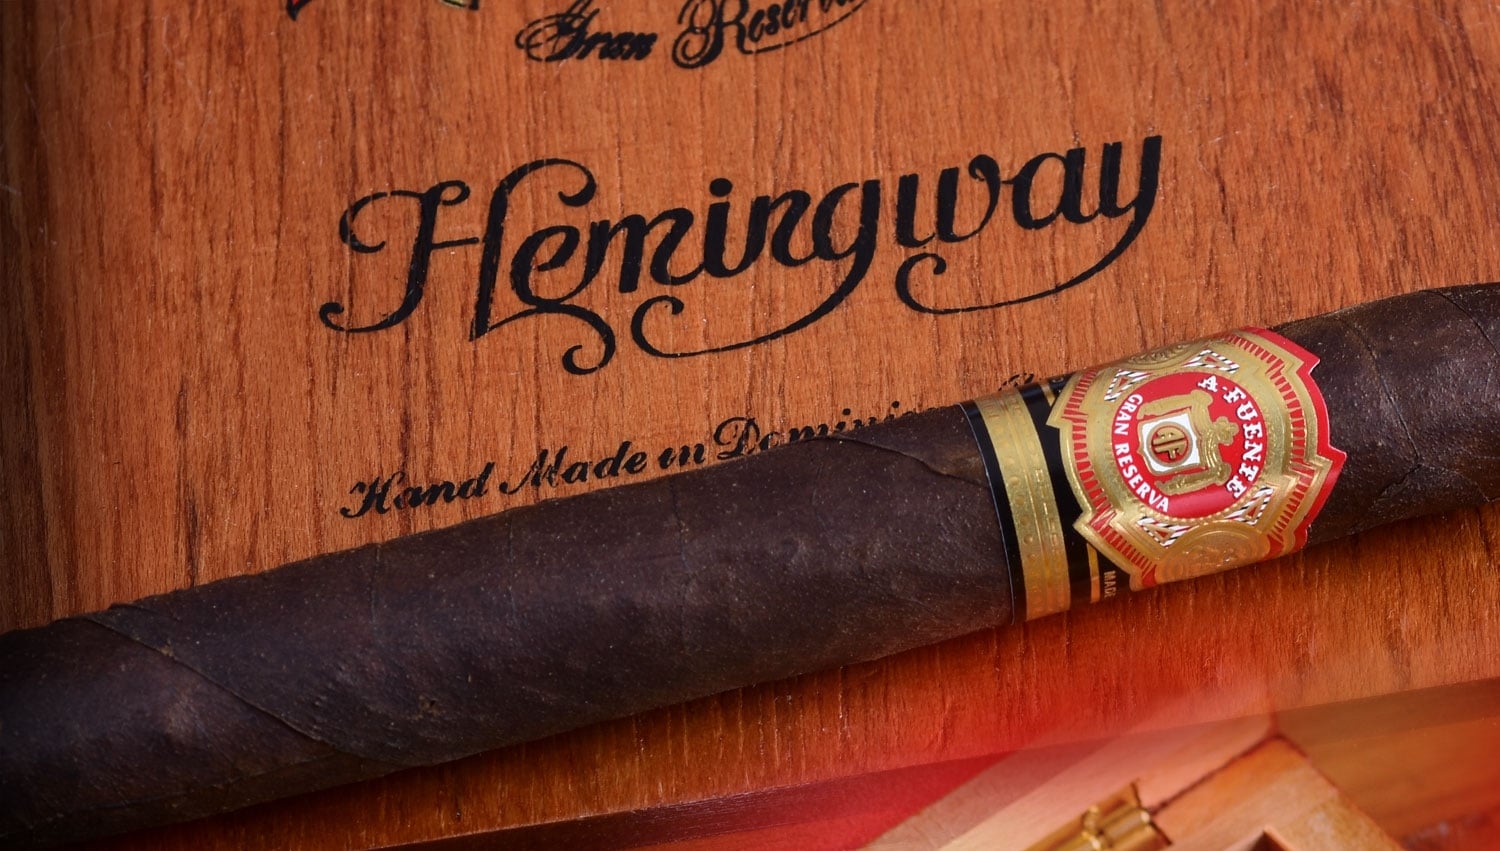 Hemingway cigars, named after the famous author, demonstrate one way smoking and reading have come together.